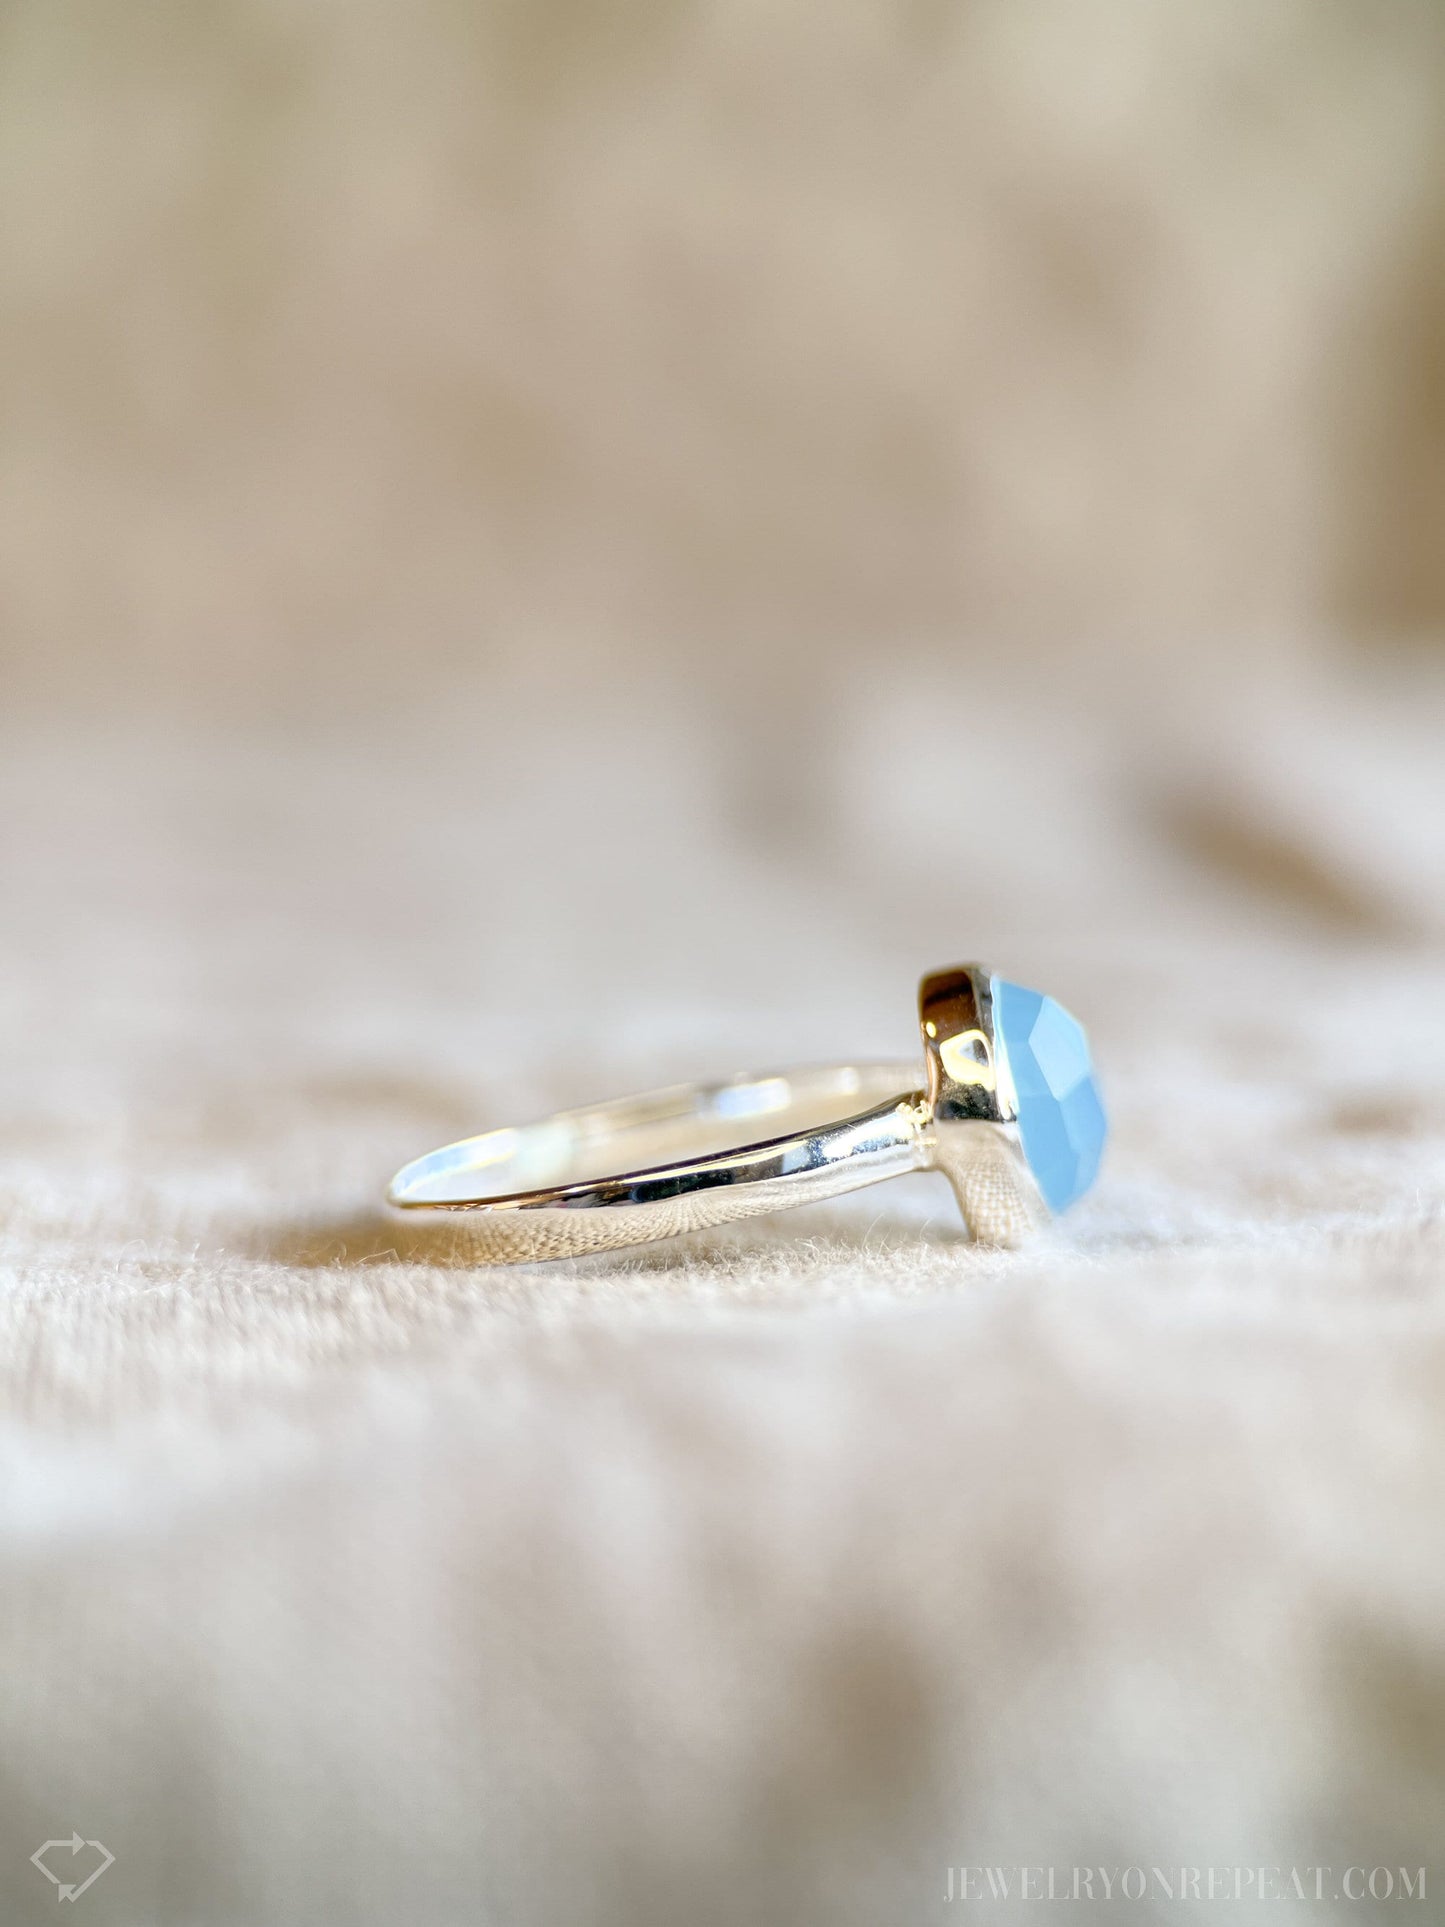 Blue Chalcedony Gemstone Ring in Sterling Silver